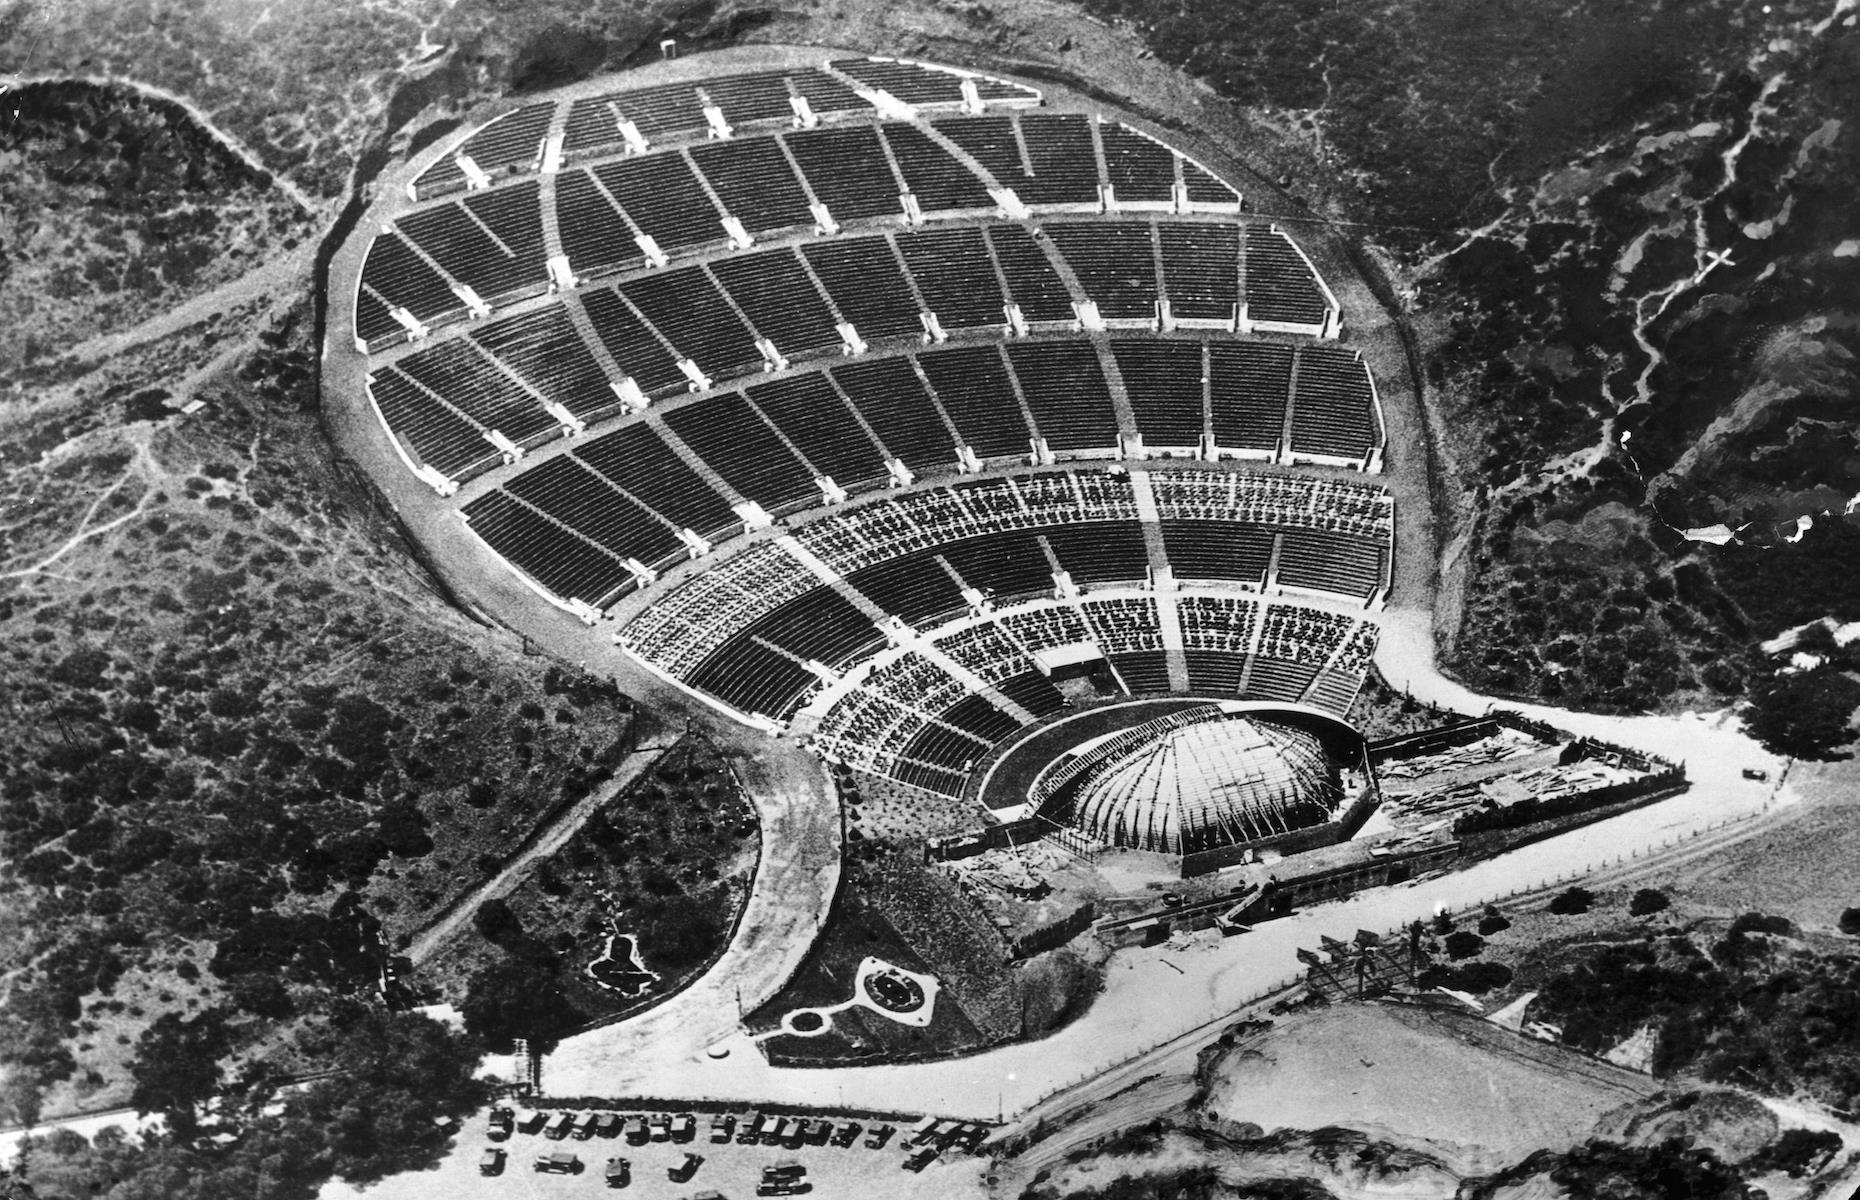 <p>This world-renowned amphitheater opened in the Hollywood Hills neighborhood in 1922. The first stage was a simple wooden platform with a canvas top and the audience were seated on wooden benches. An arched stage was built in 1926 with its distinctive shell shape first added in 1929. The 55-ton shell (pictured here in the 1930s) became an architectural icon. The 1930s saw jazz performances here for the first time and it went on to host the likes of Ella Fitzgerald, Billie Holliday and The Beatles.</p>